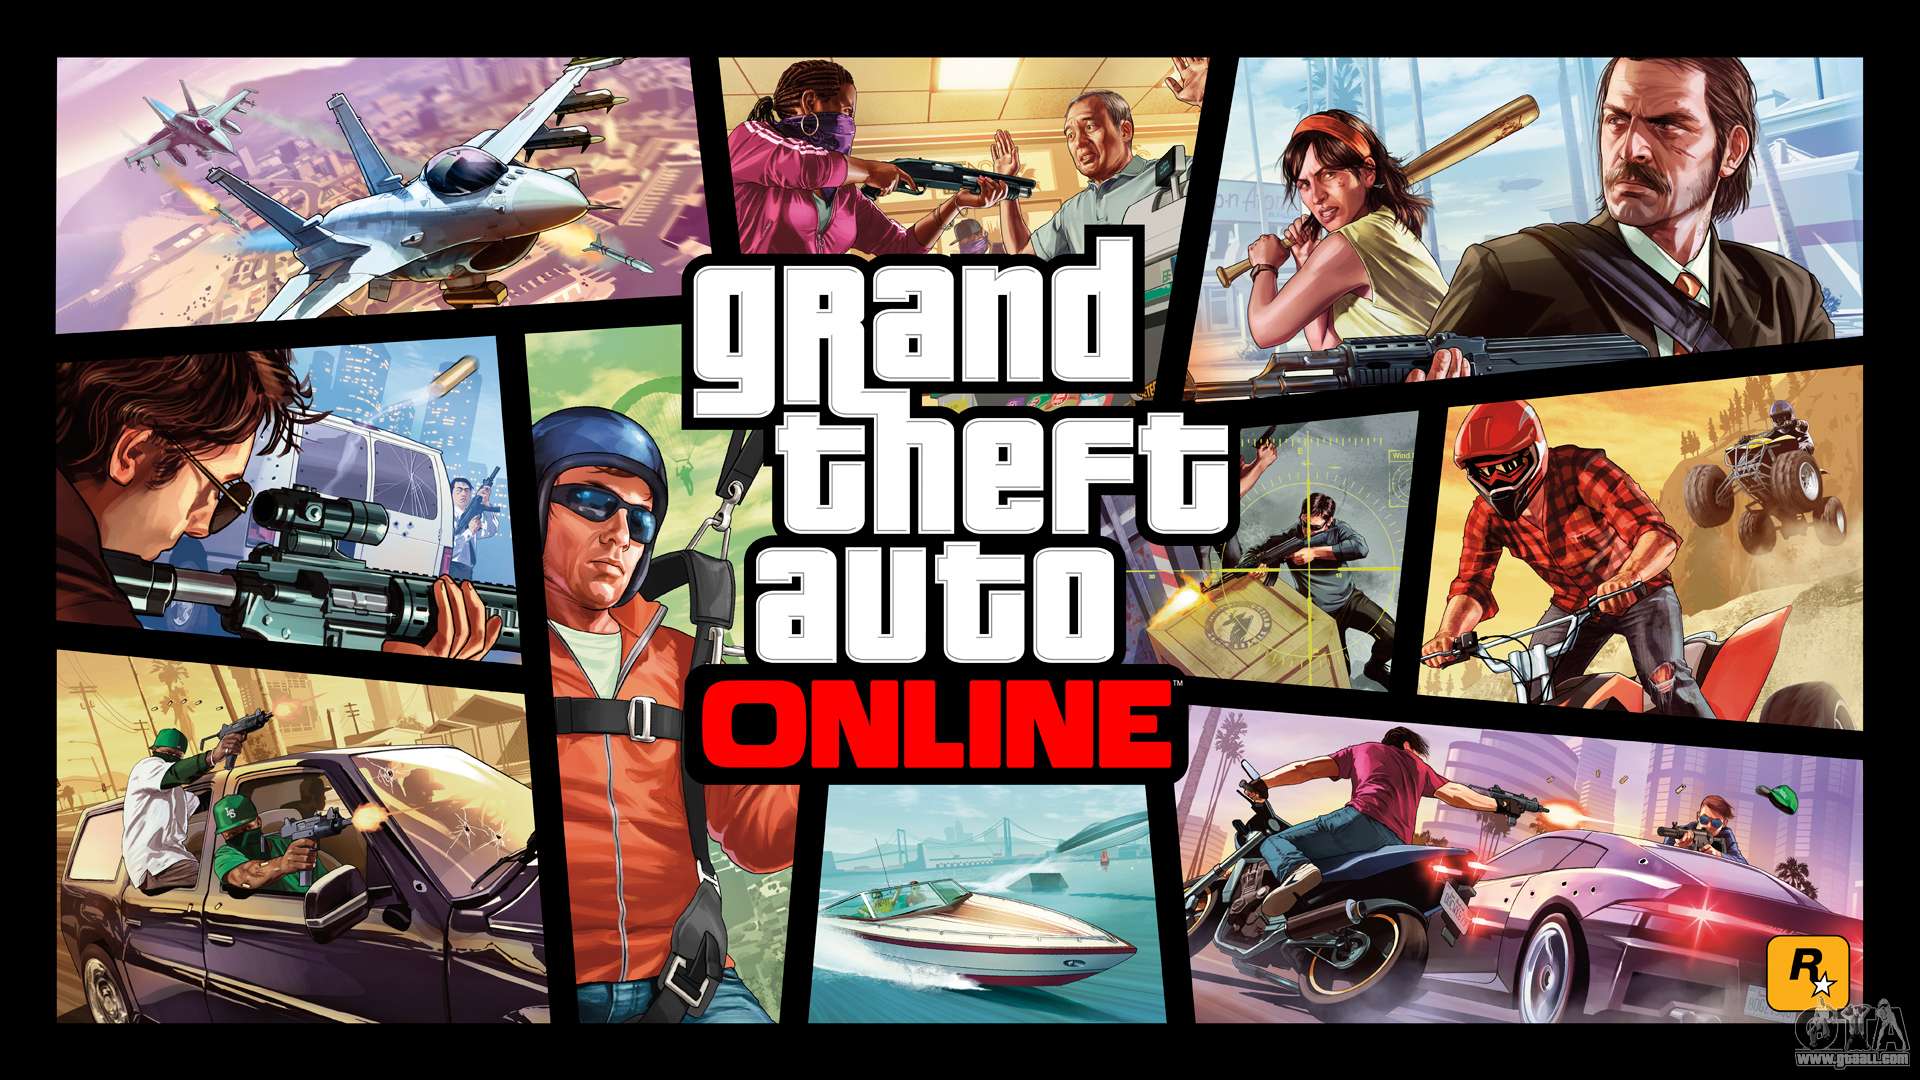 GTA 5 PC: system requirements and news, cheat codes and mods